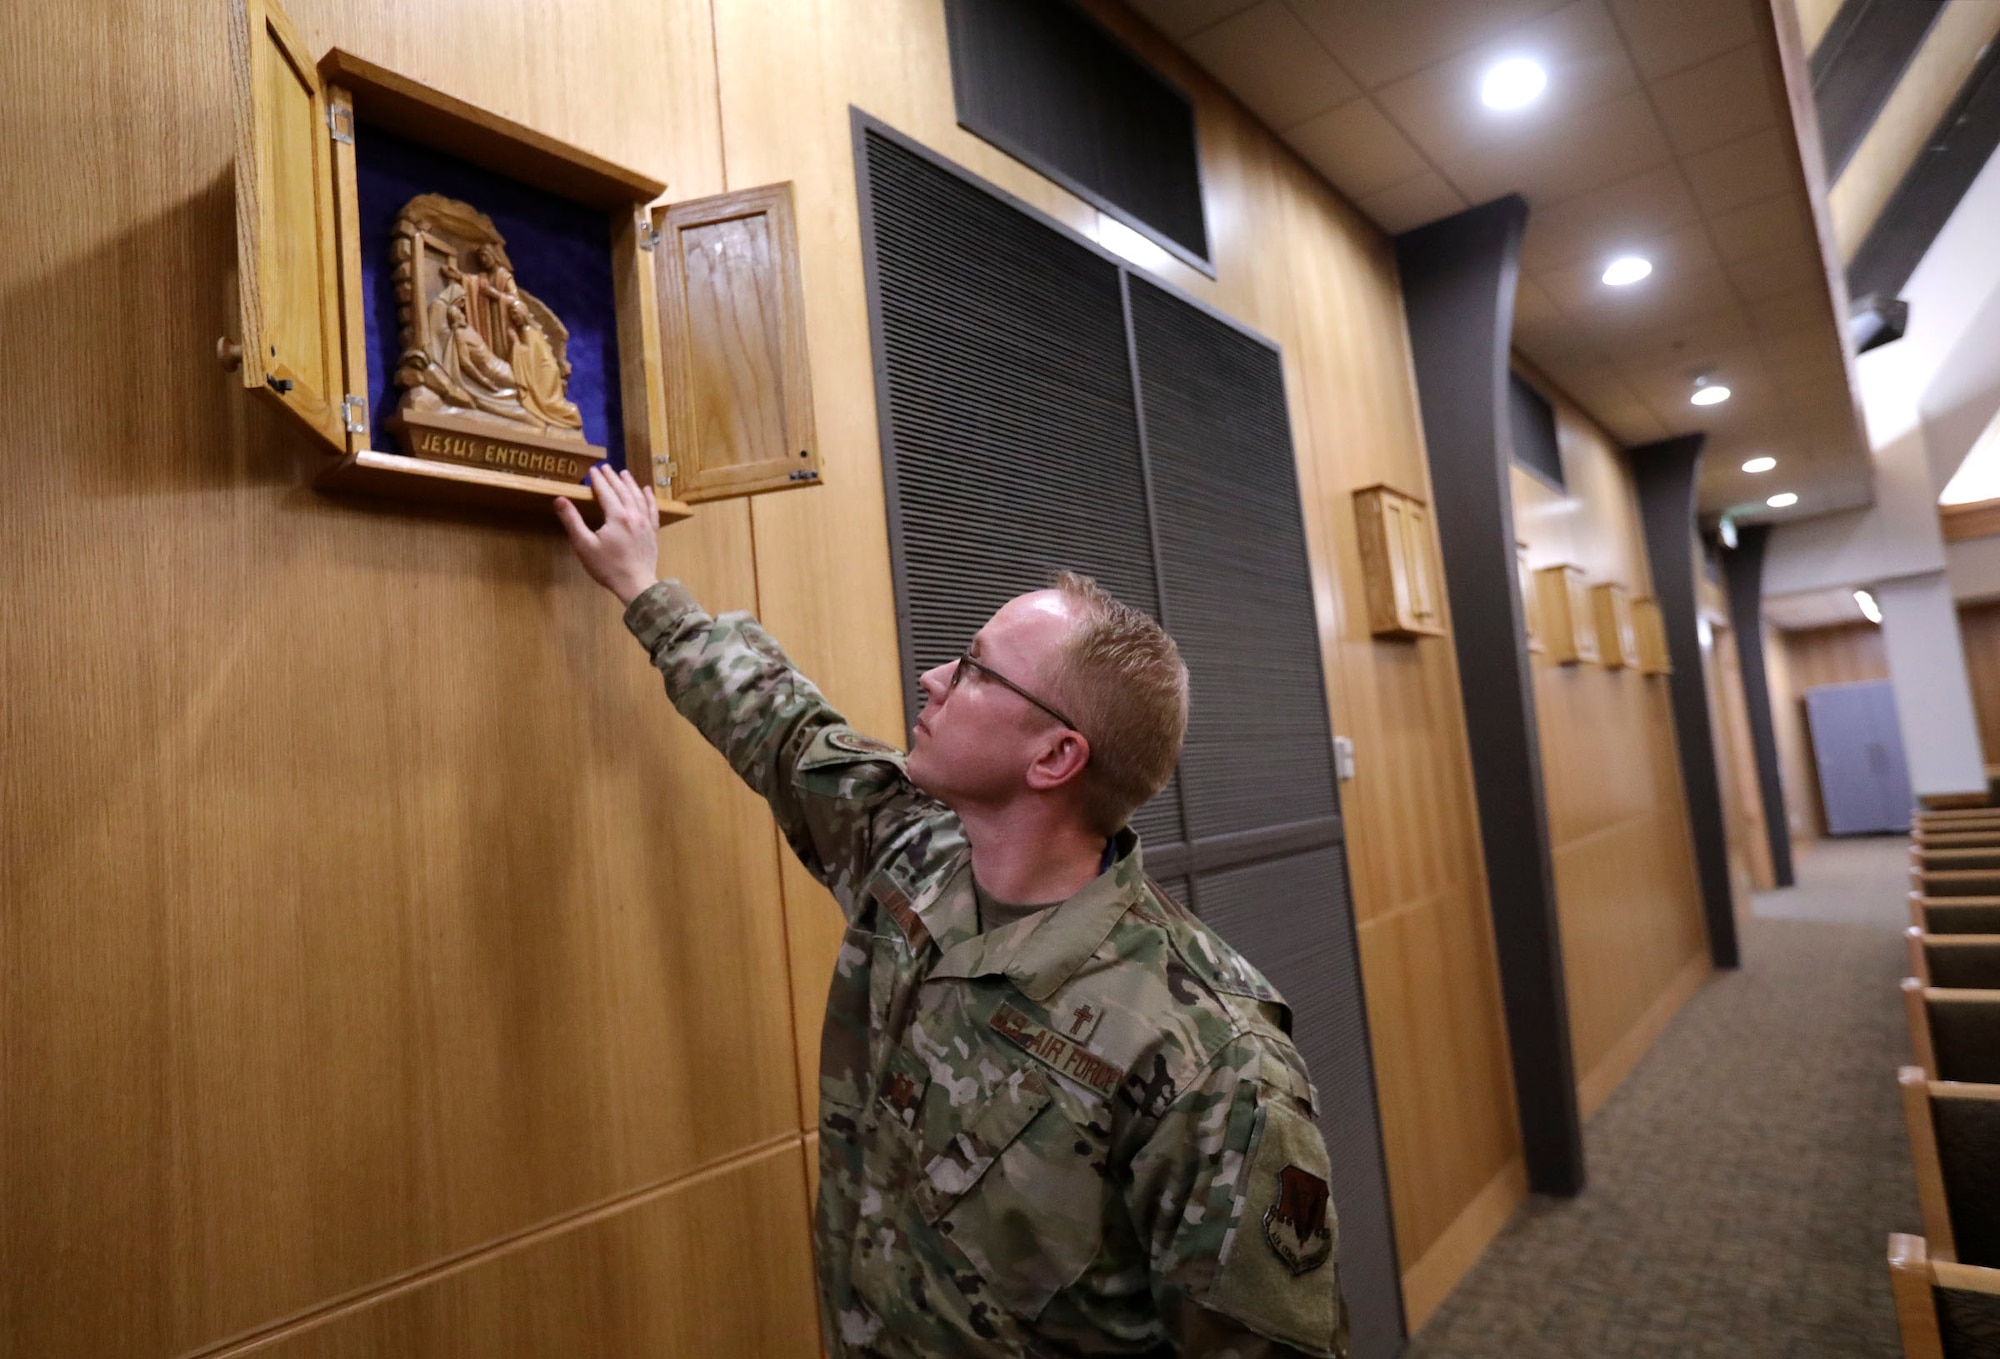 Capt. J. Ammon Larsen, a chaplain at Hill Air Force Base, shows how depictions of the Stations of the Cross in the base's sanctuary.